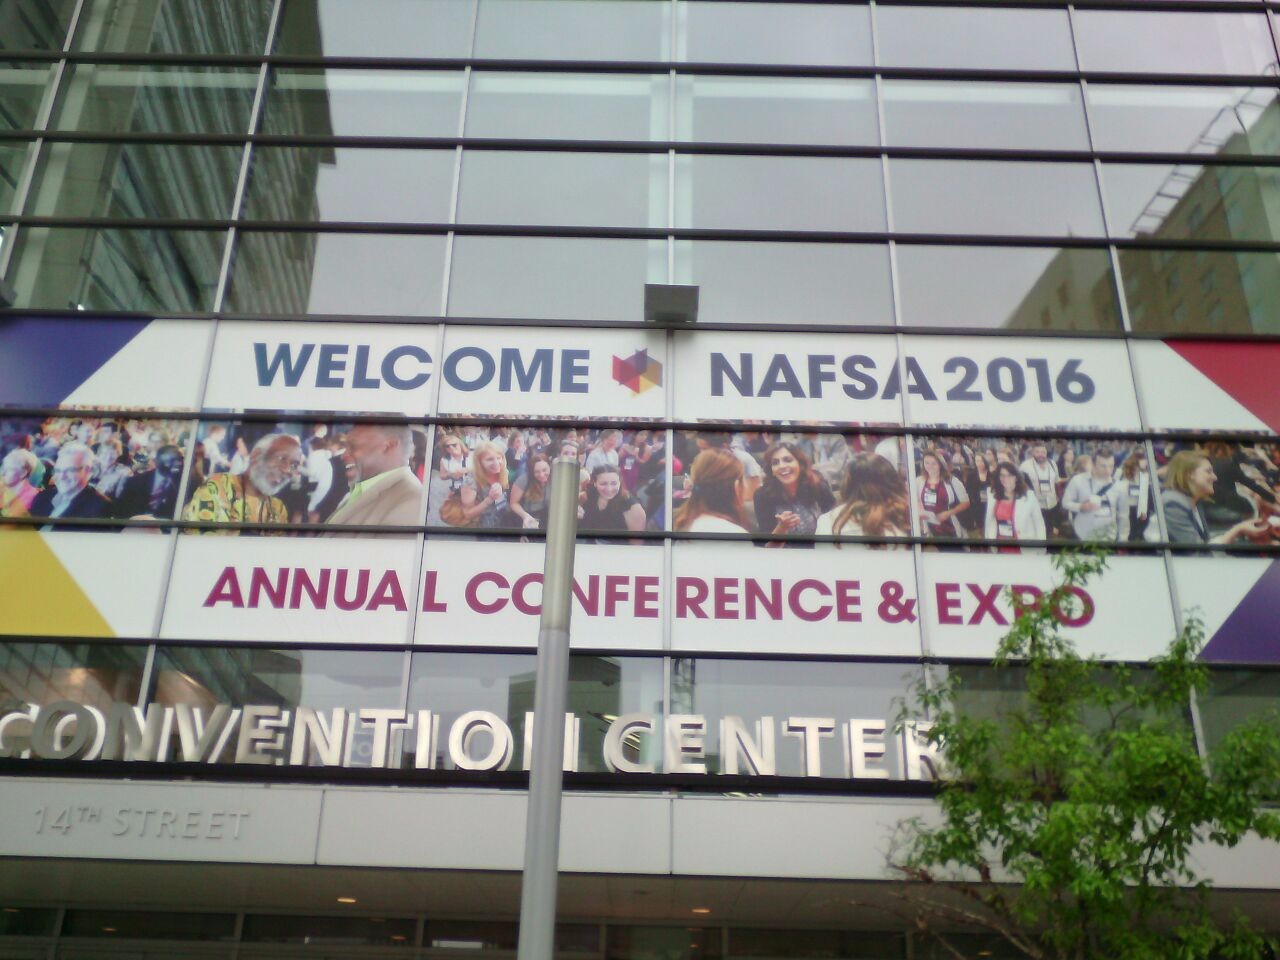      NAFSA Annual Conference & Expo  